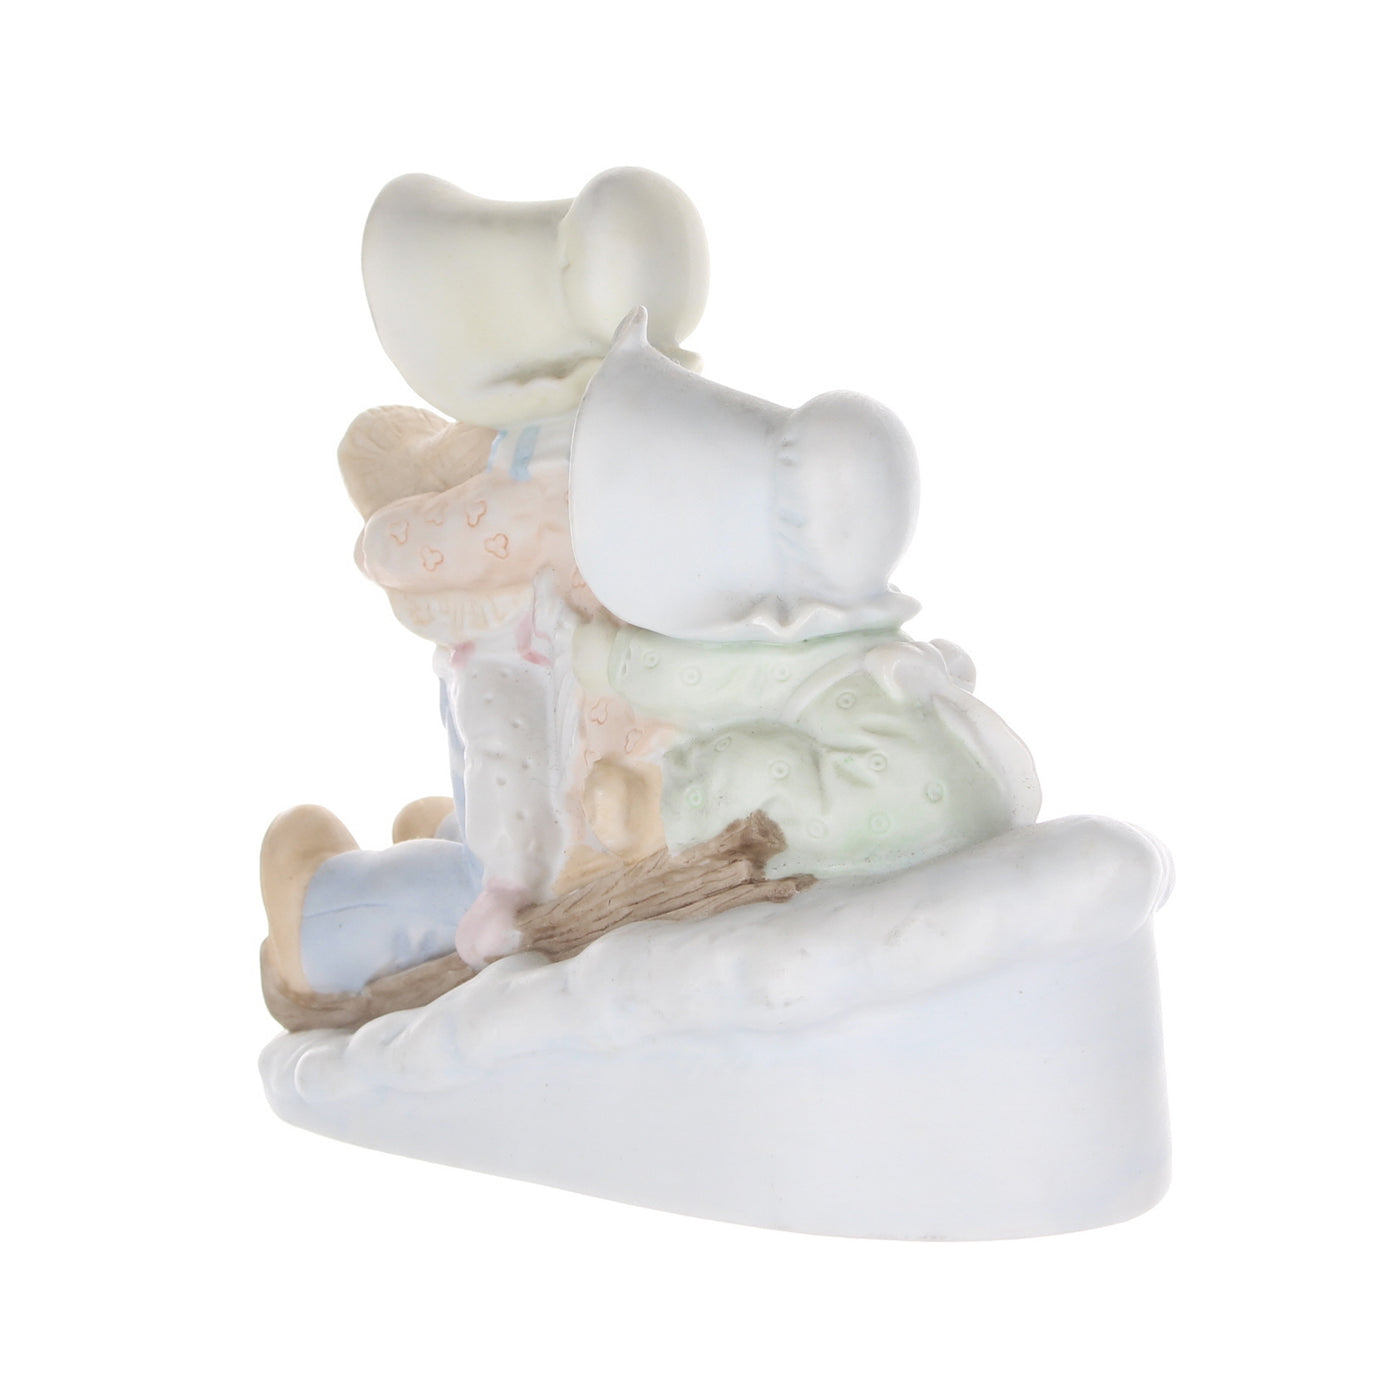 Homco-Circle-of-Friends-Porcelain-Figurine-A-Sledding-We-Will-Go-picture-2